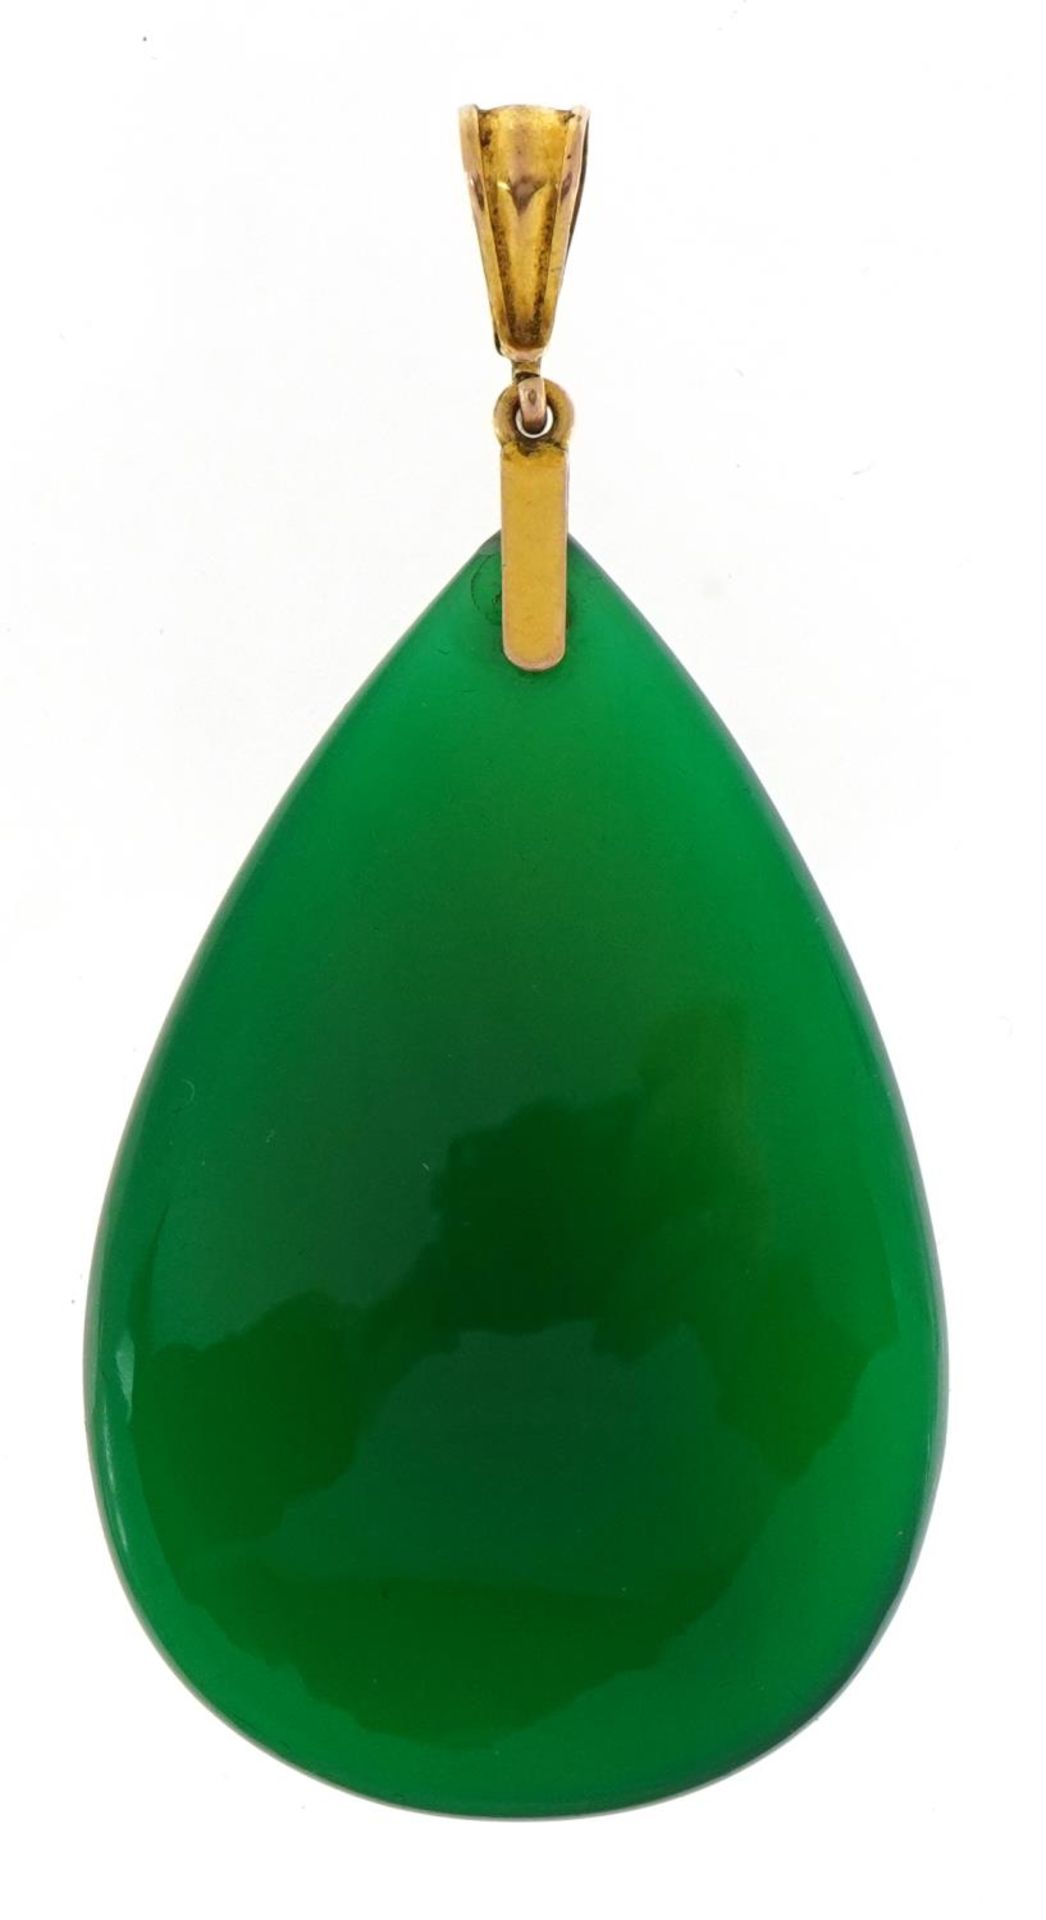 Large green stone tear drop pendant with 9ct gold suspension loop, 6.4cm high, 18.5g : For further - Image 2 of 4